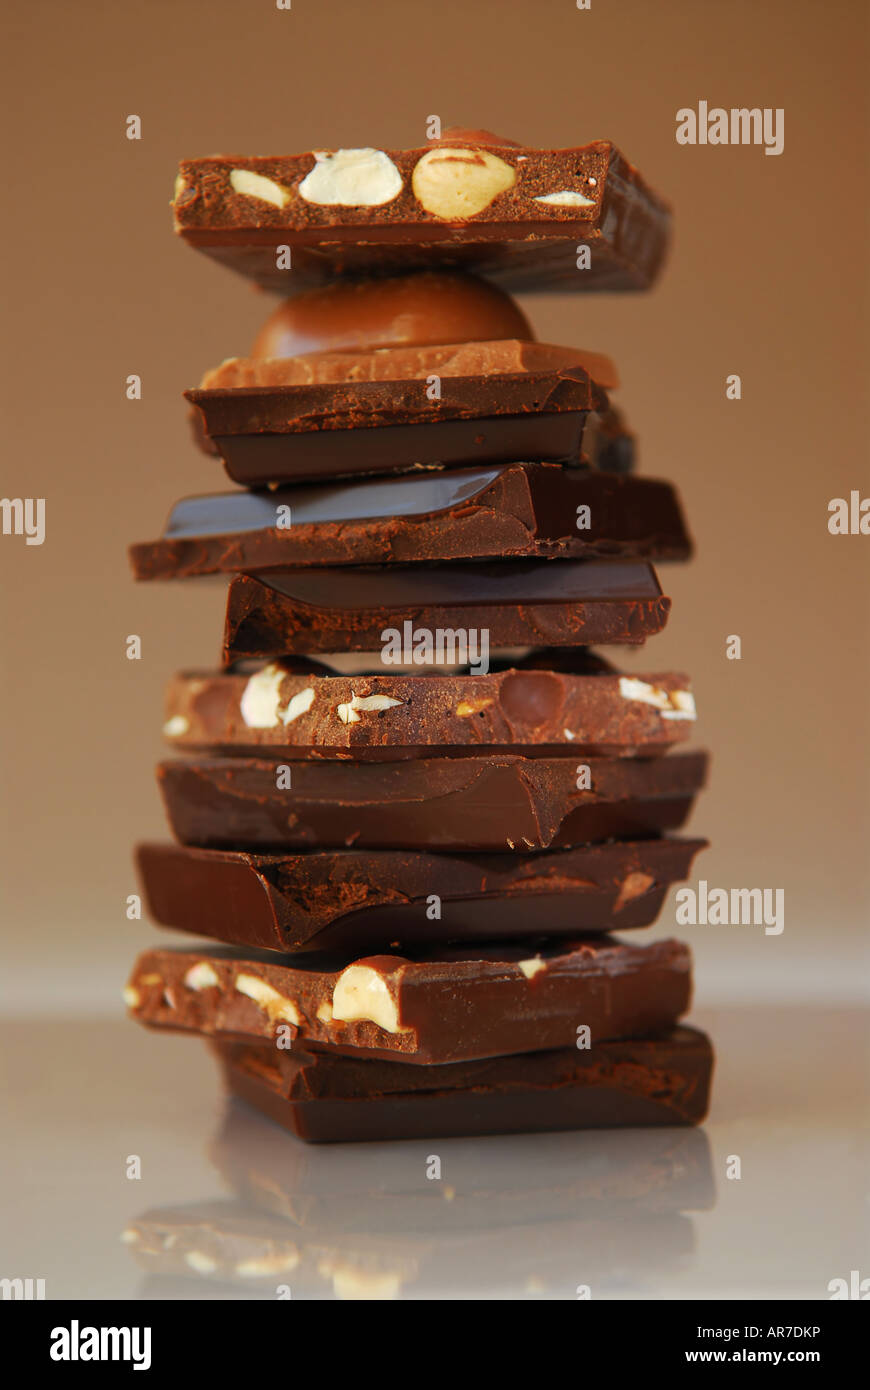 Stack of broken pieces of chocolate from assorted bars Stock Photo